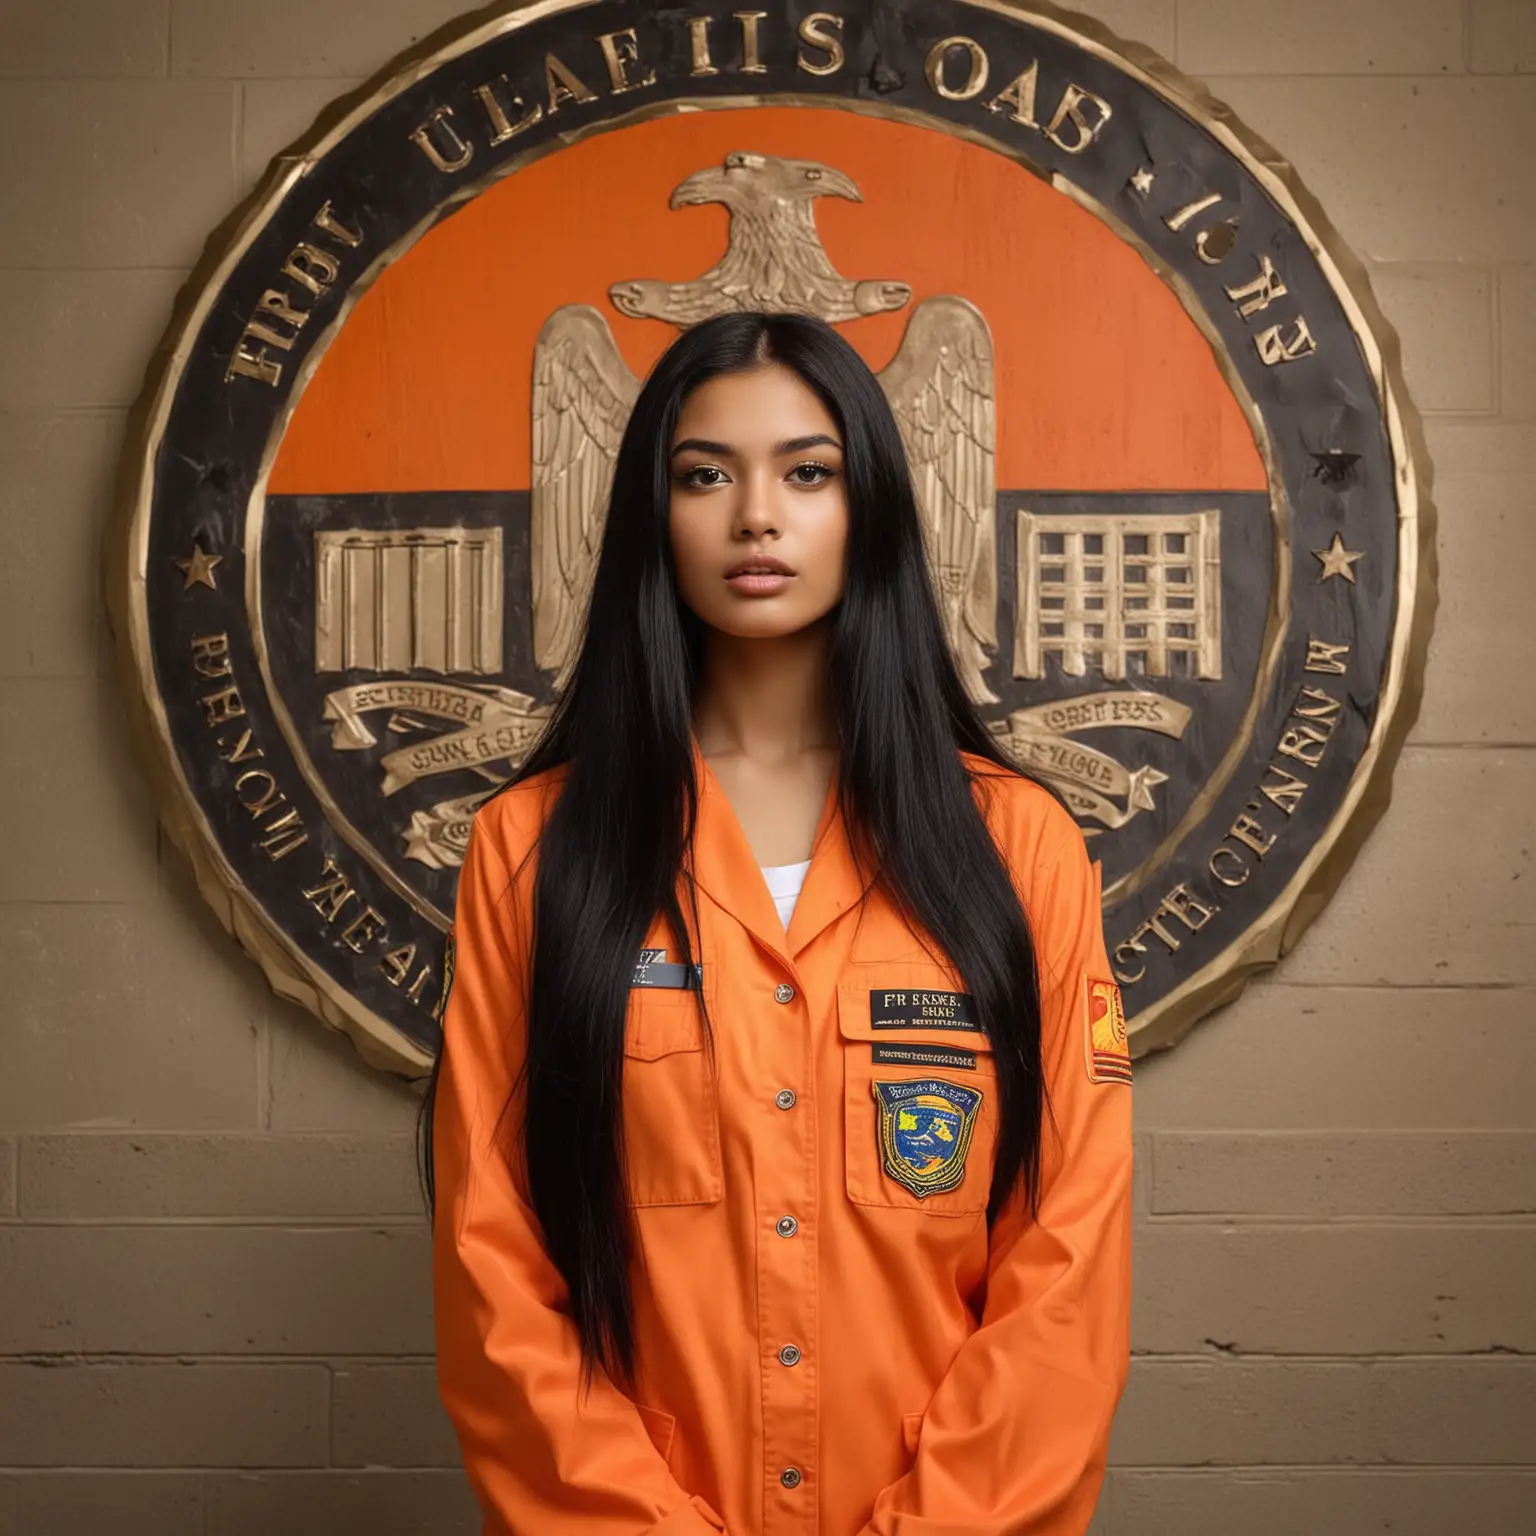 Young supermodel beauty very, very long black hair, Sri-Lankan & Polynesian ethnic 21 year old girl, standing in orange prison uniform in front of the FBI emblem, CIA emblem USA flag, Democratic Emblem on a wall like a government office, she has tape over her mouth.